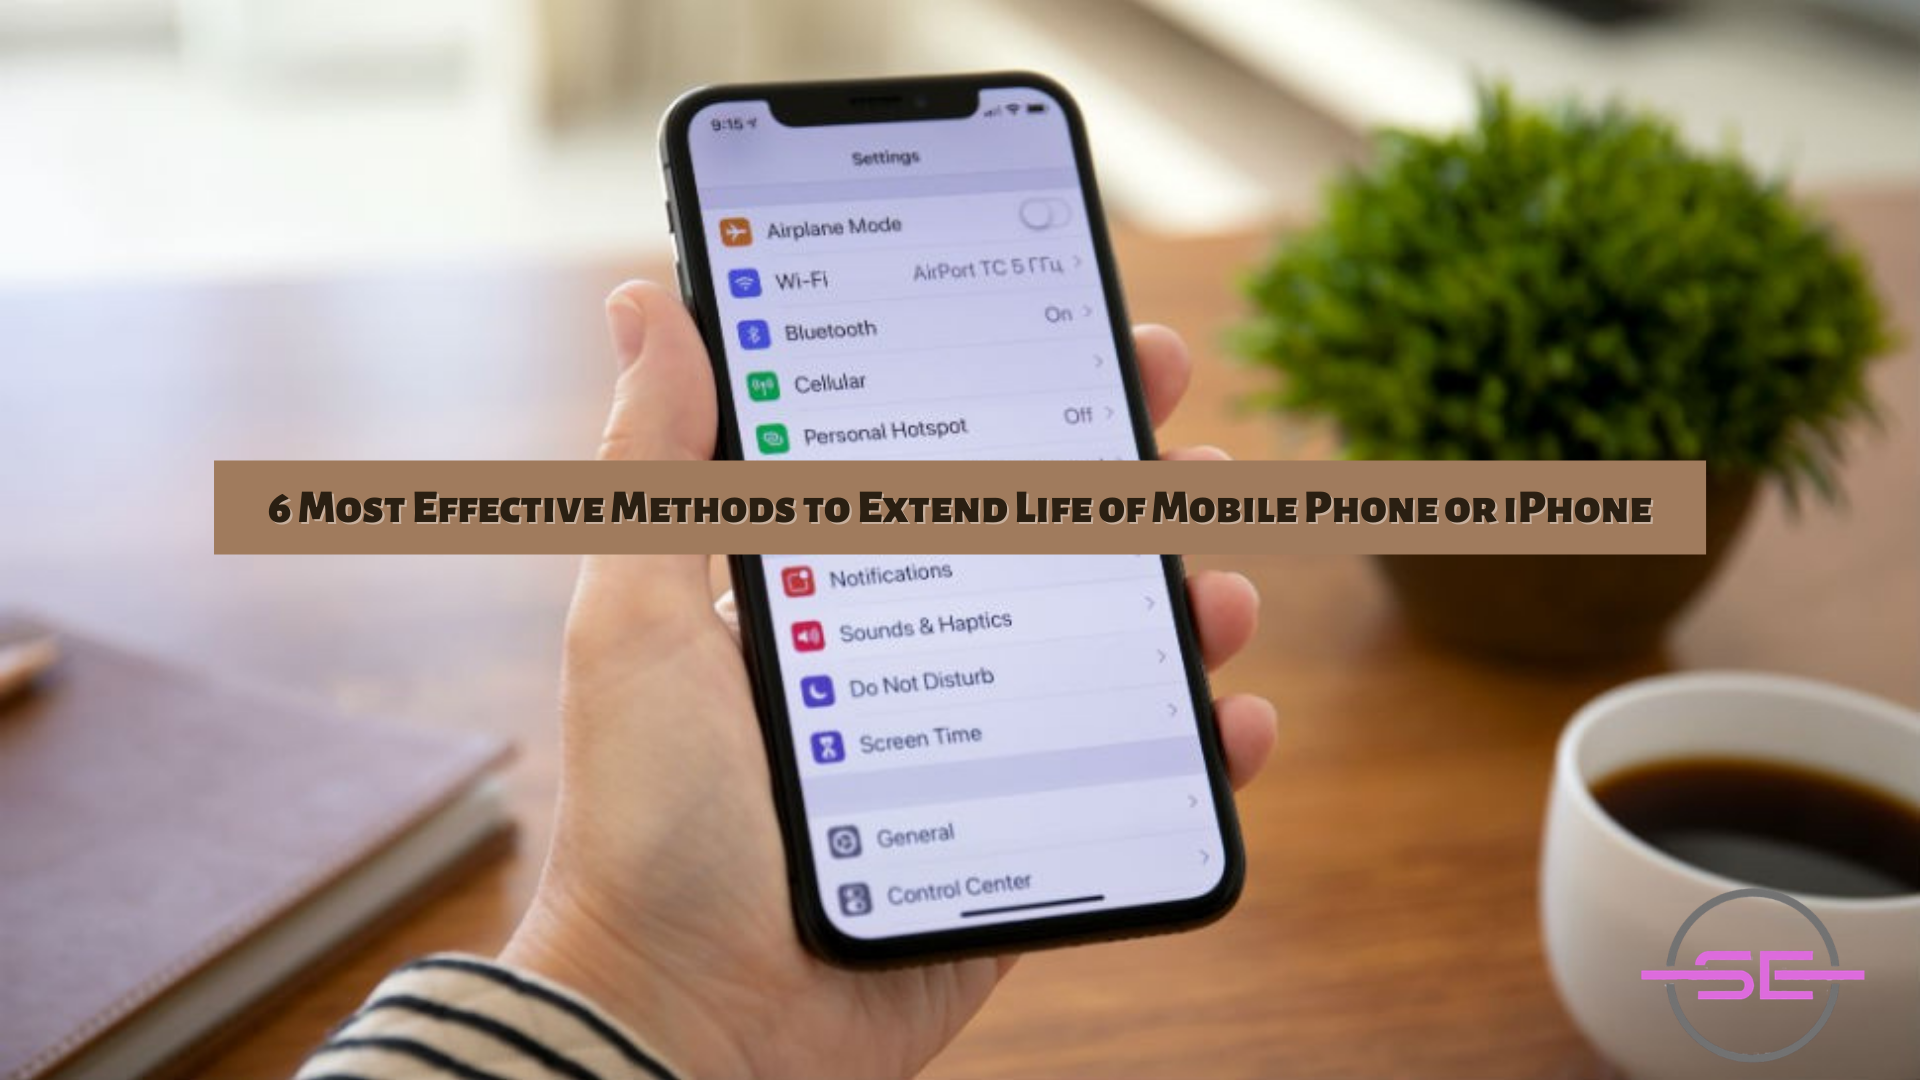 6 Most Effective Methods to Extend Life of Mobile Phone or iPhone